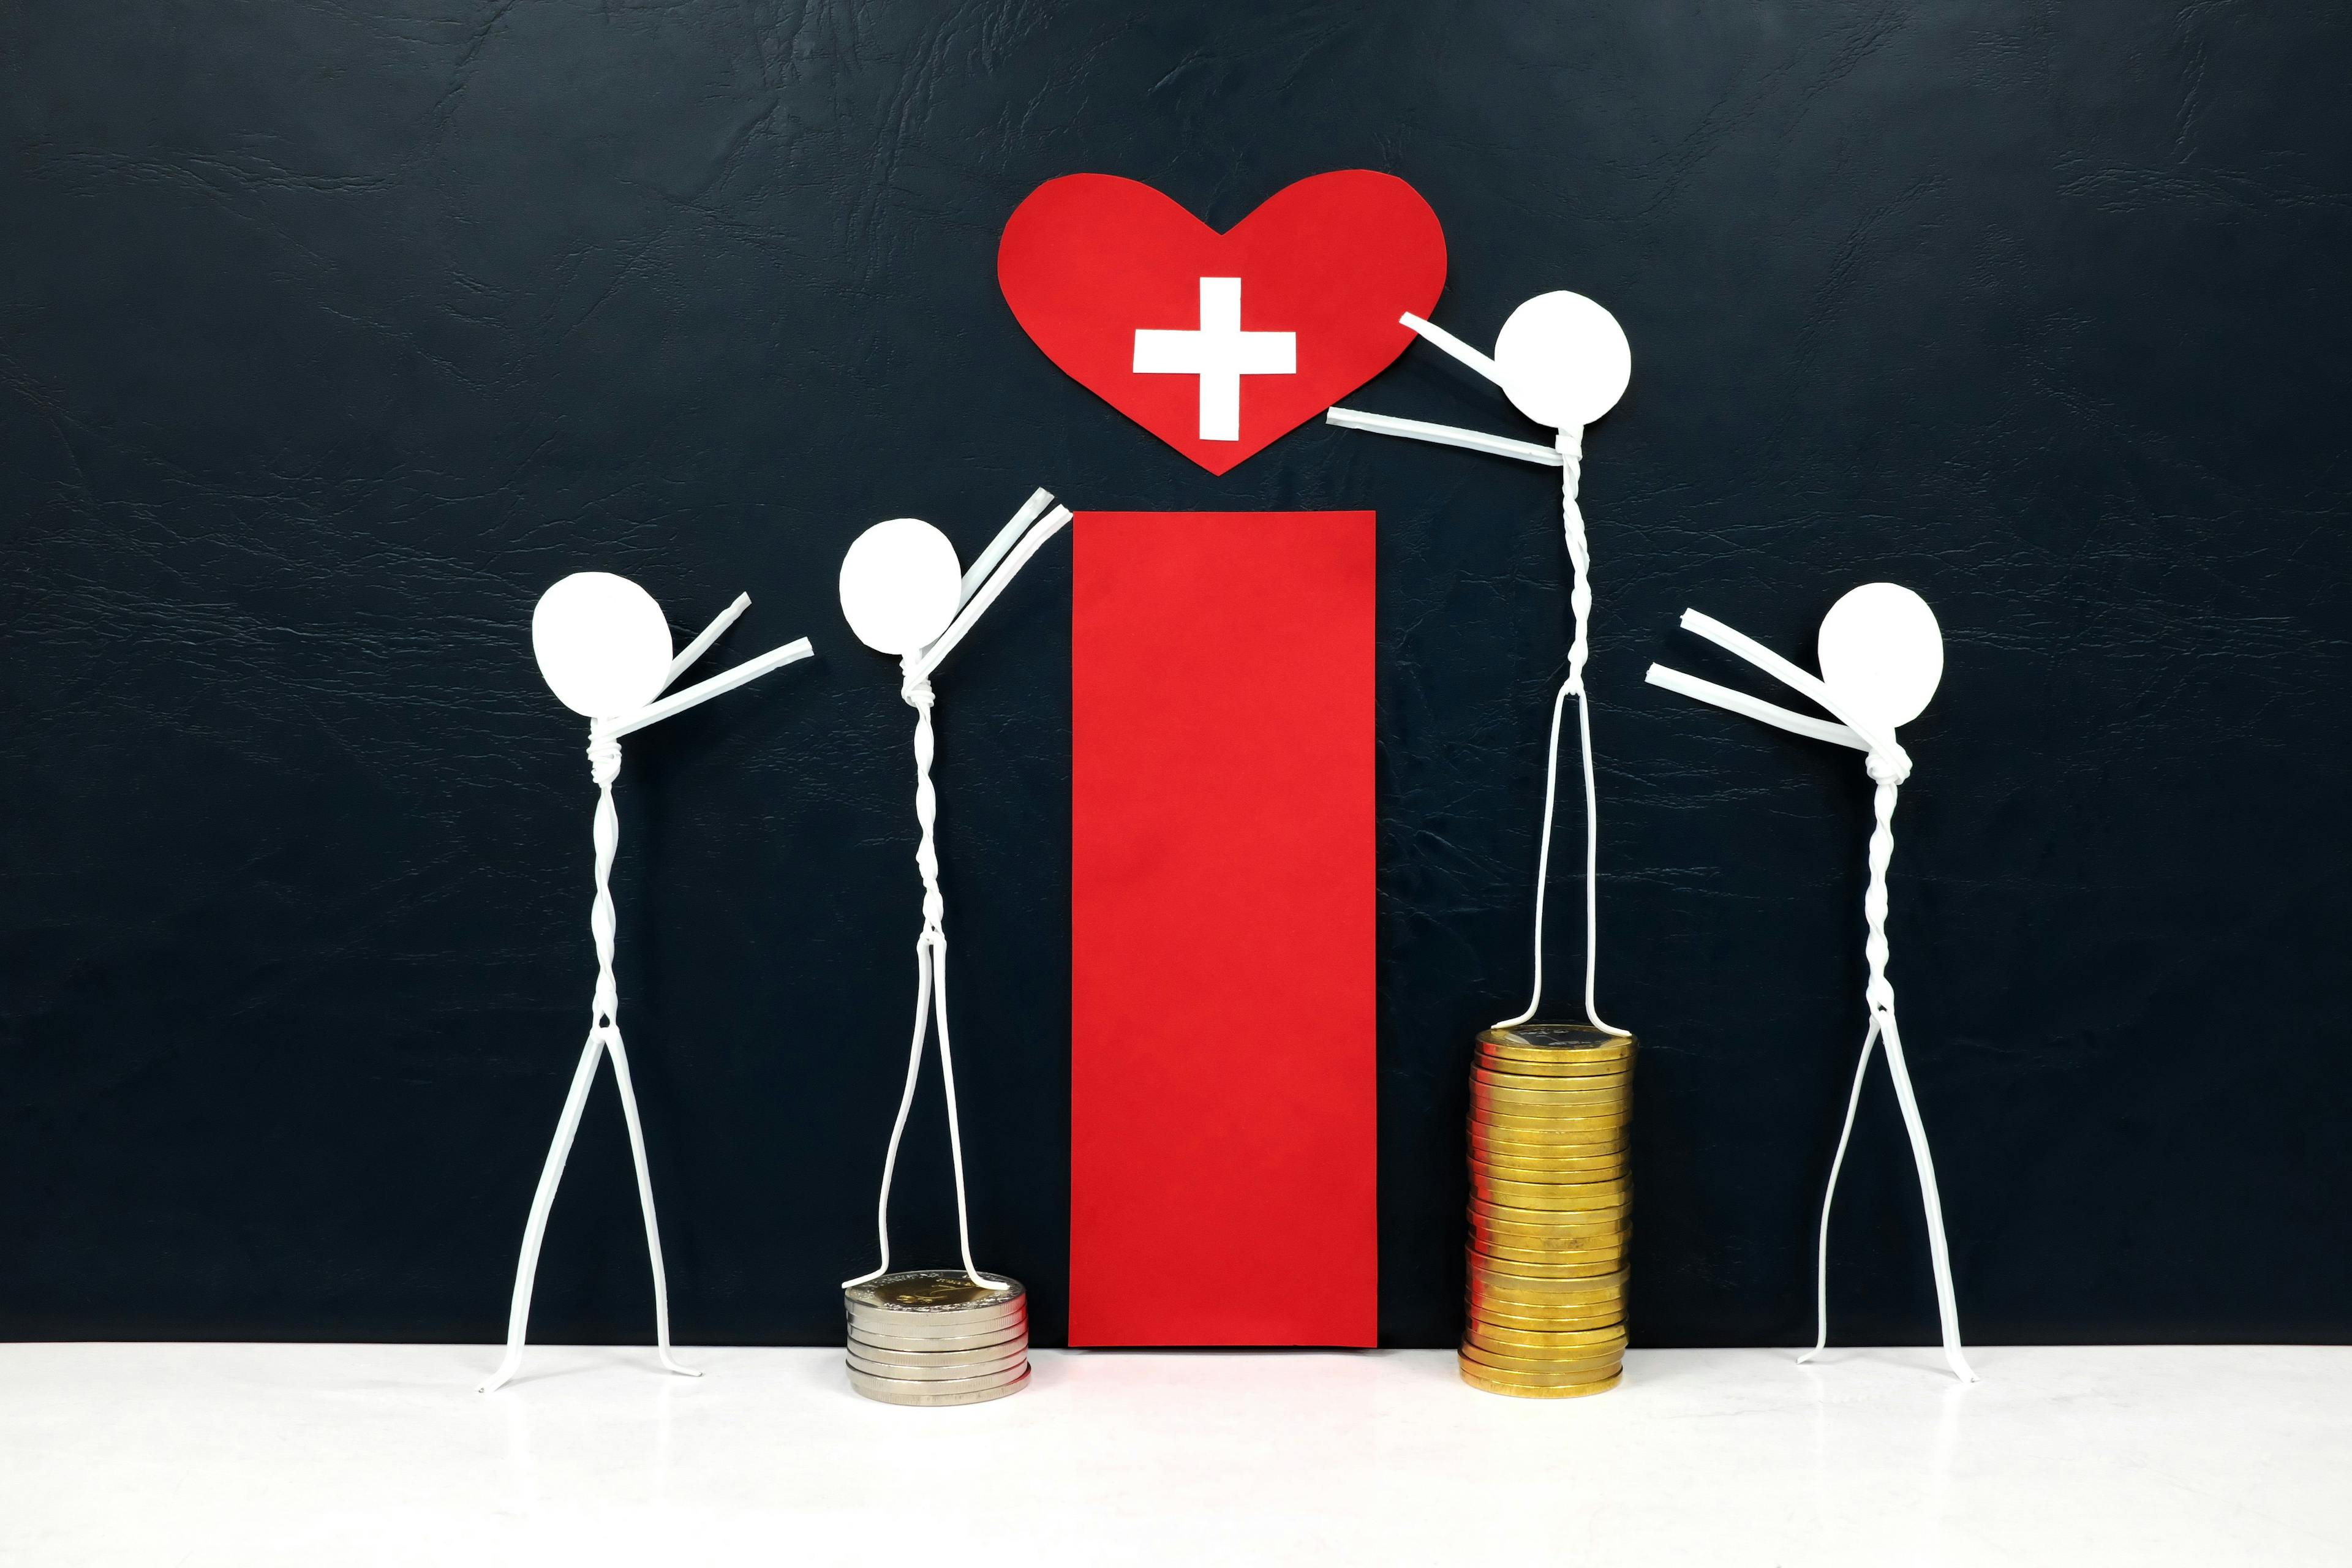 Stick figure reaching for a red heart shape with cross cutout while stepping on stack of coins. Healthcare, medical care and hospital access inequality concept. | Image credit: © sulit.photos © stock.adobe.com